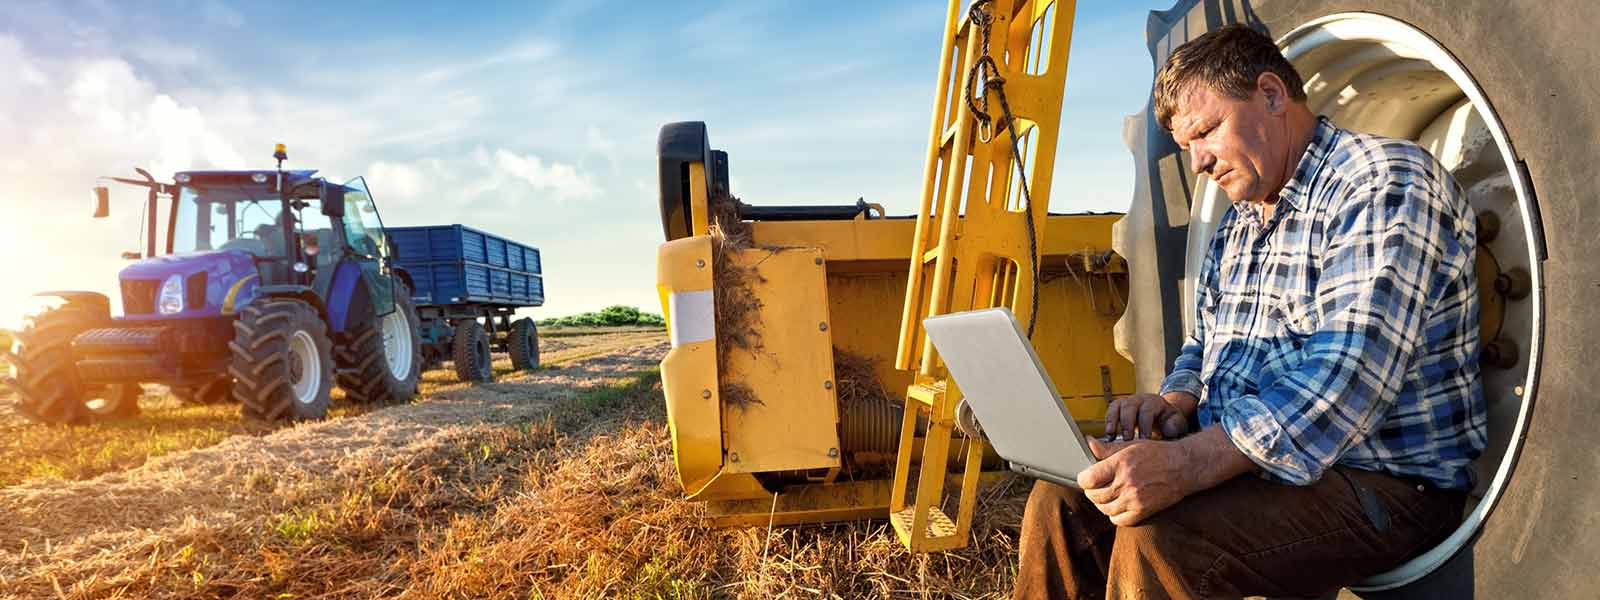 A farmer uses a computer in the field